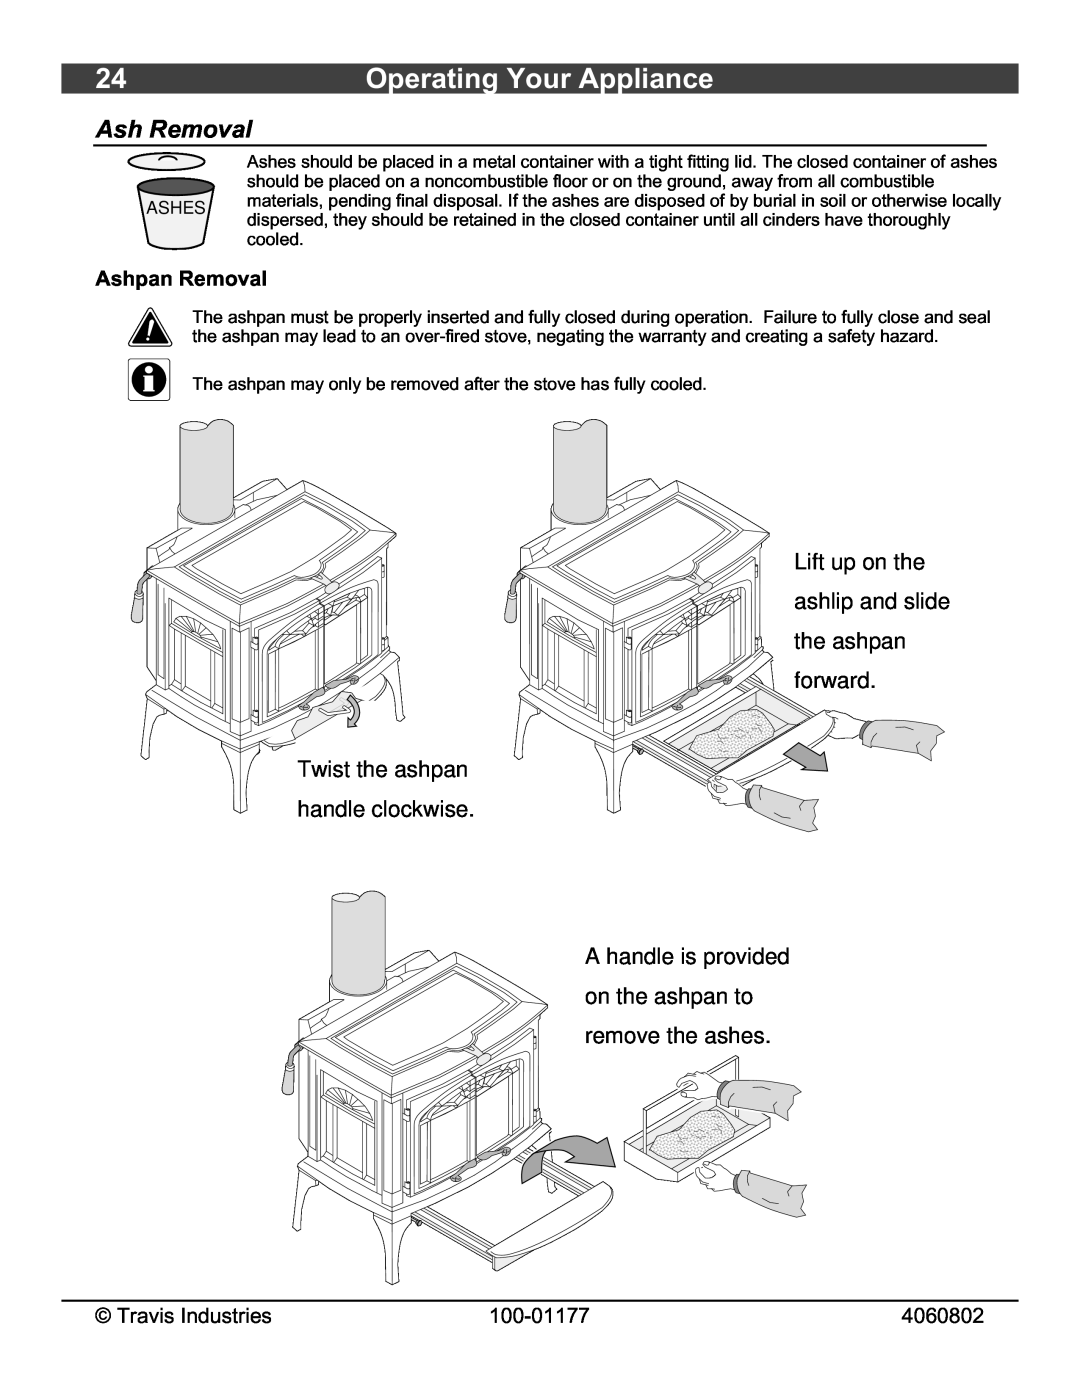 Lopi Leyden Wood Stove Operating Your Appliance, Ash Removal, Lift up on the ashlip and slide the ashpan, remove the ashes 